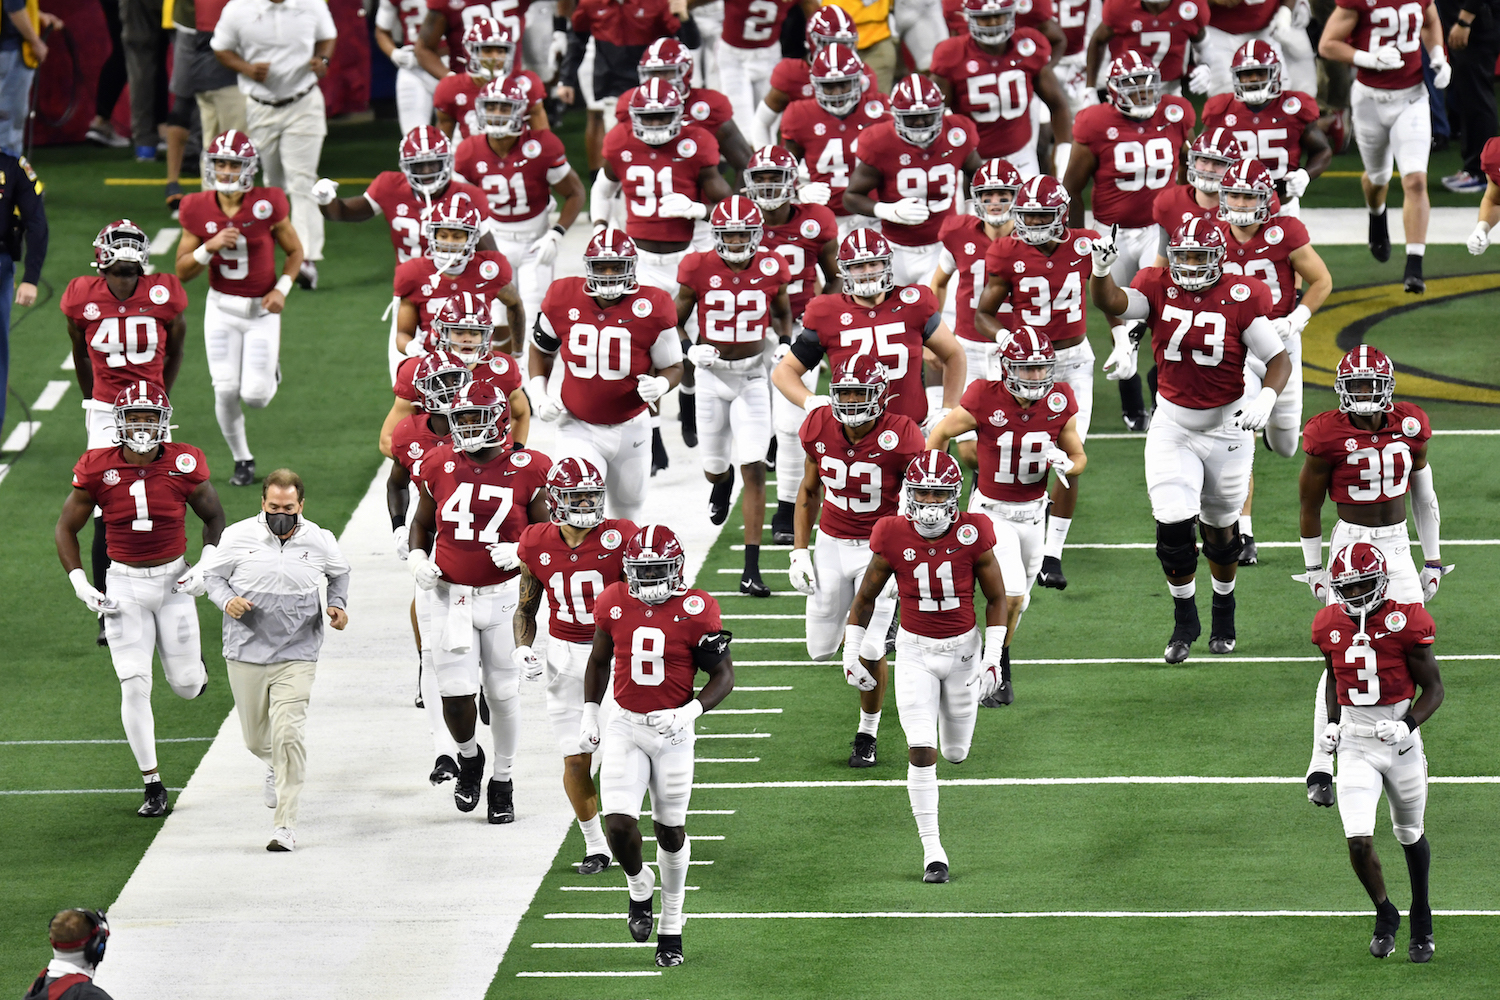 AHow did the Alabama Crimson Tide get their colorful name?